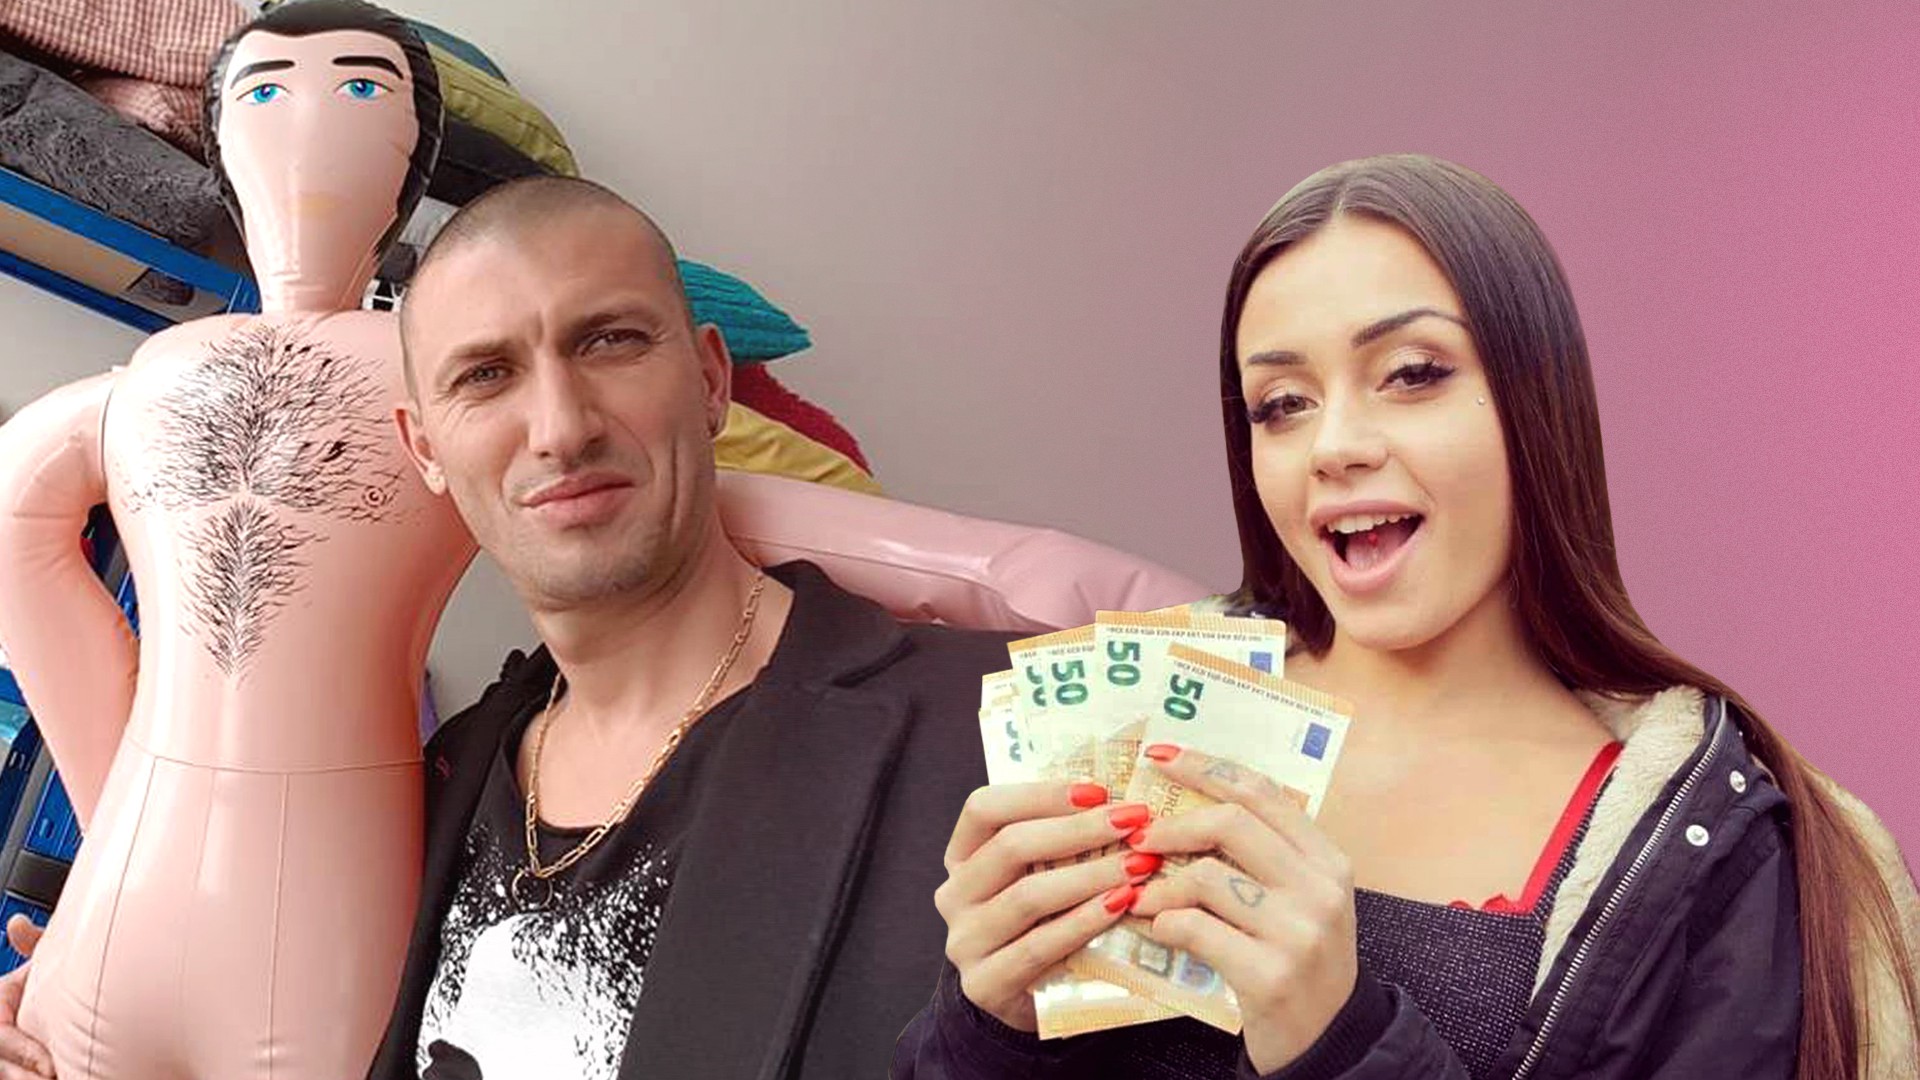 Xxx Videose Inporn Shop - We Asked Porn Stars Much Money They Make - VICE